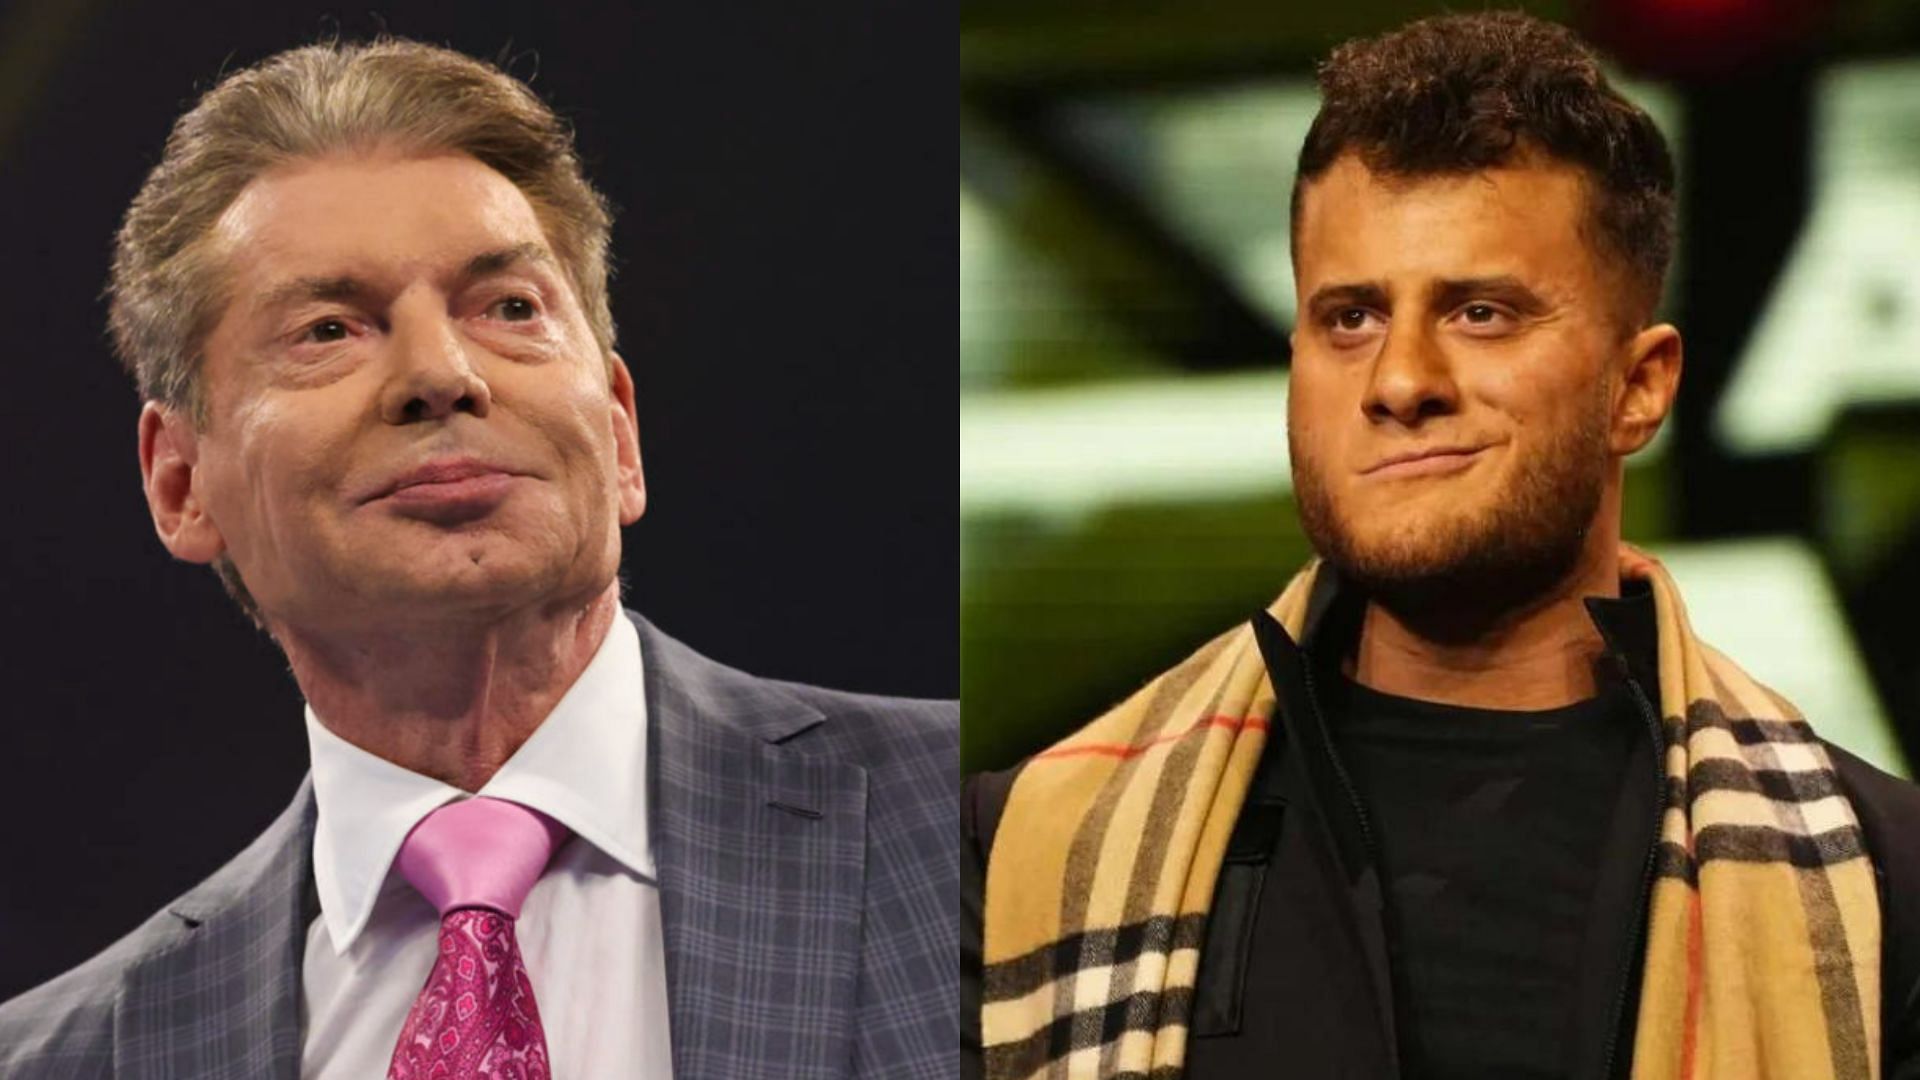 MJF spoke about Vince McMahon and his legacy